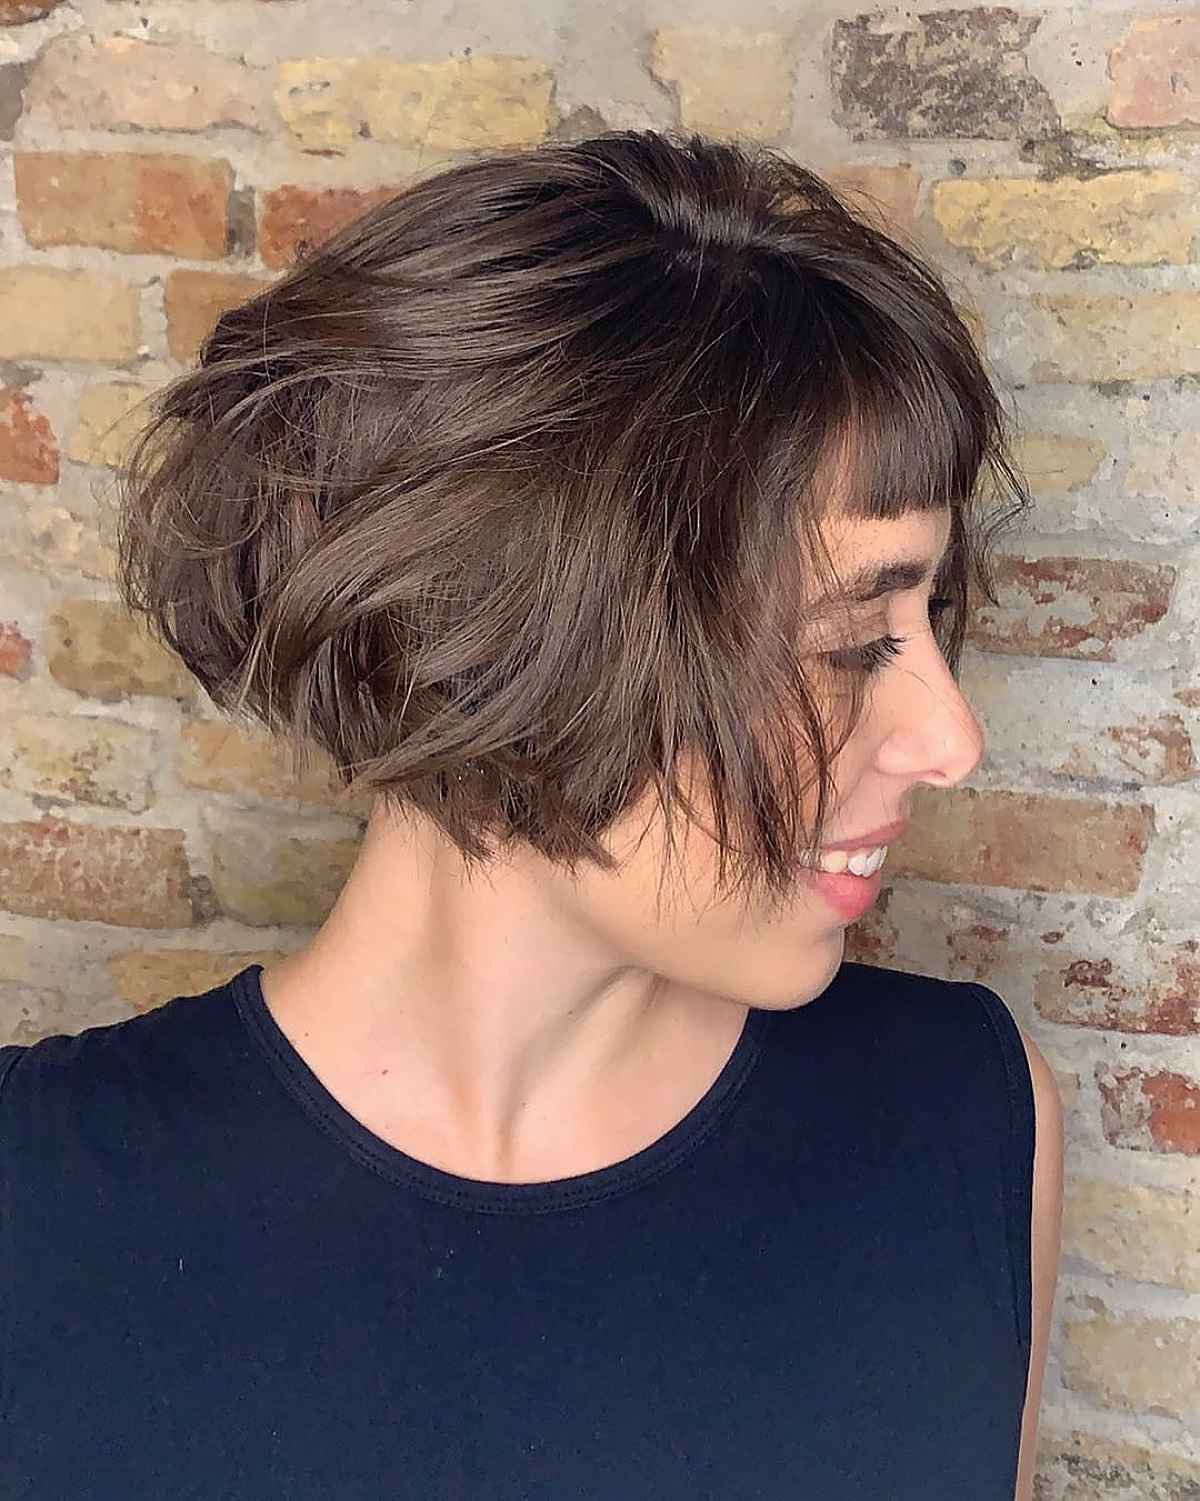 15 Best Inverted Bobs for Thin Hair to Look Fuller